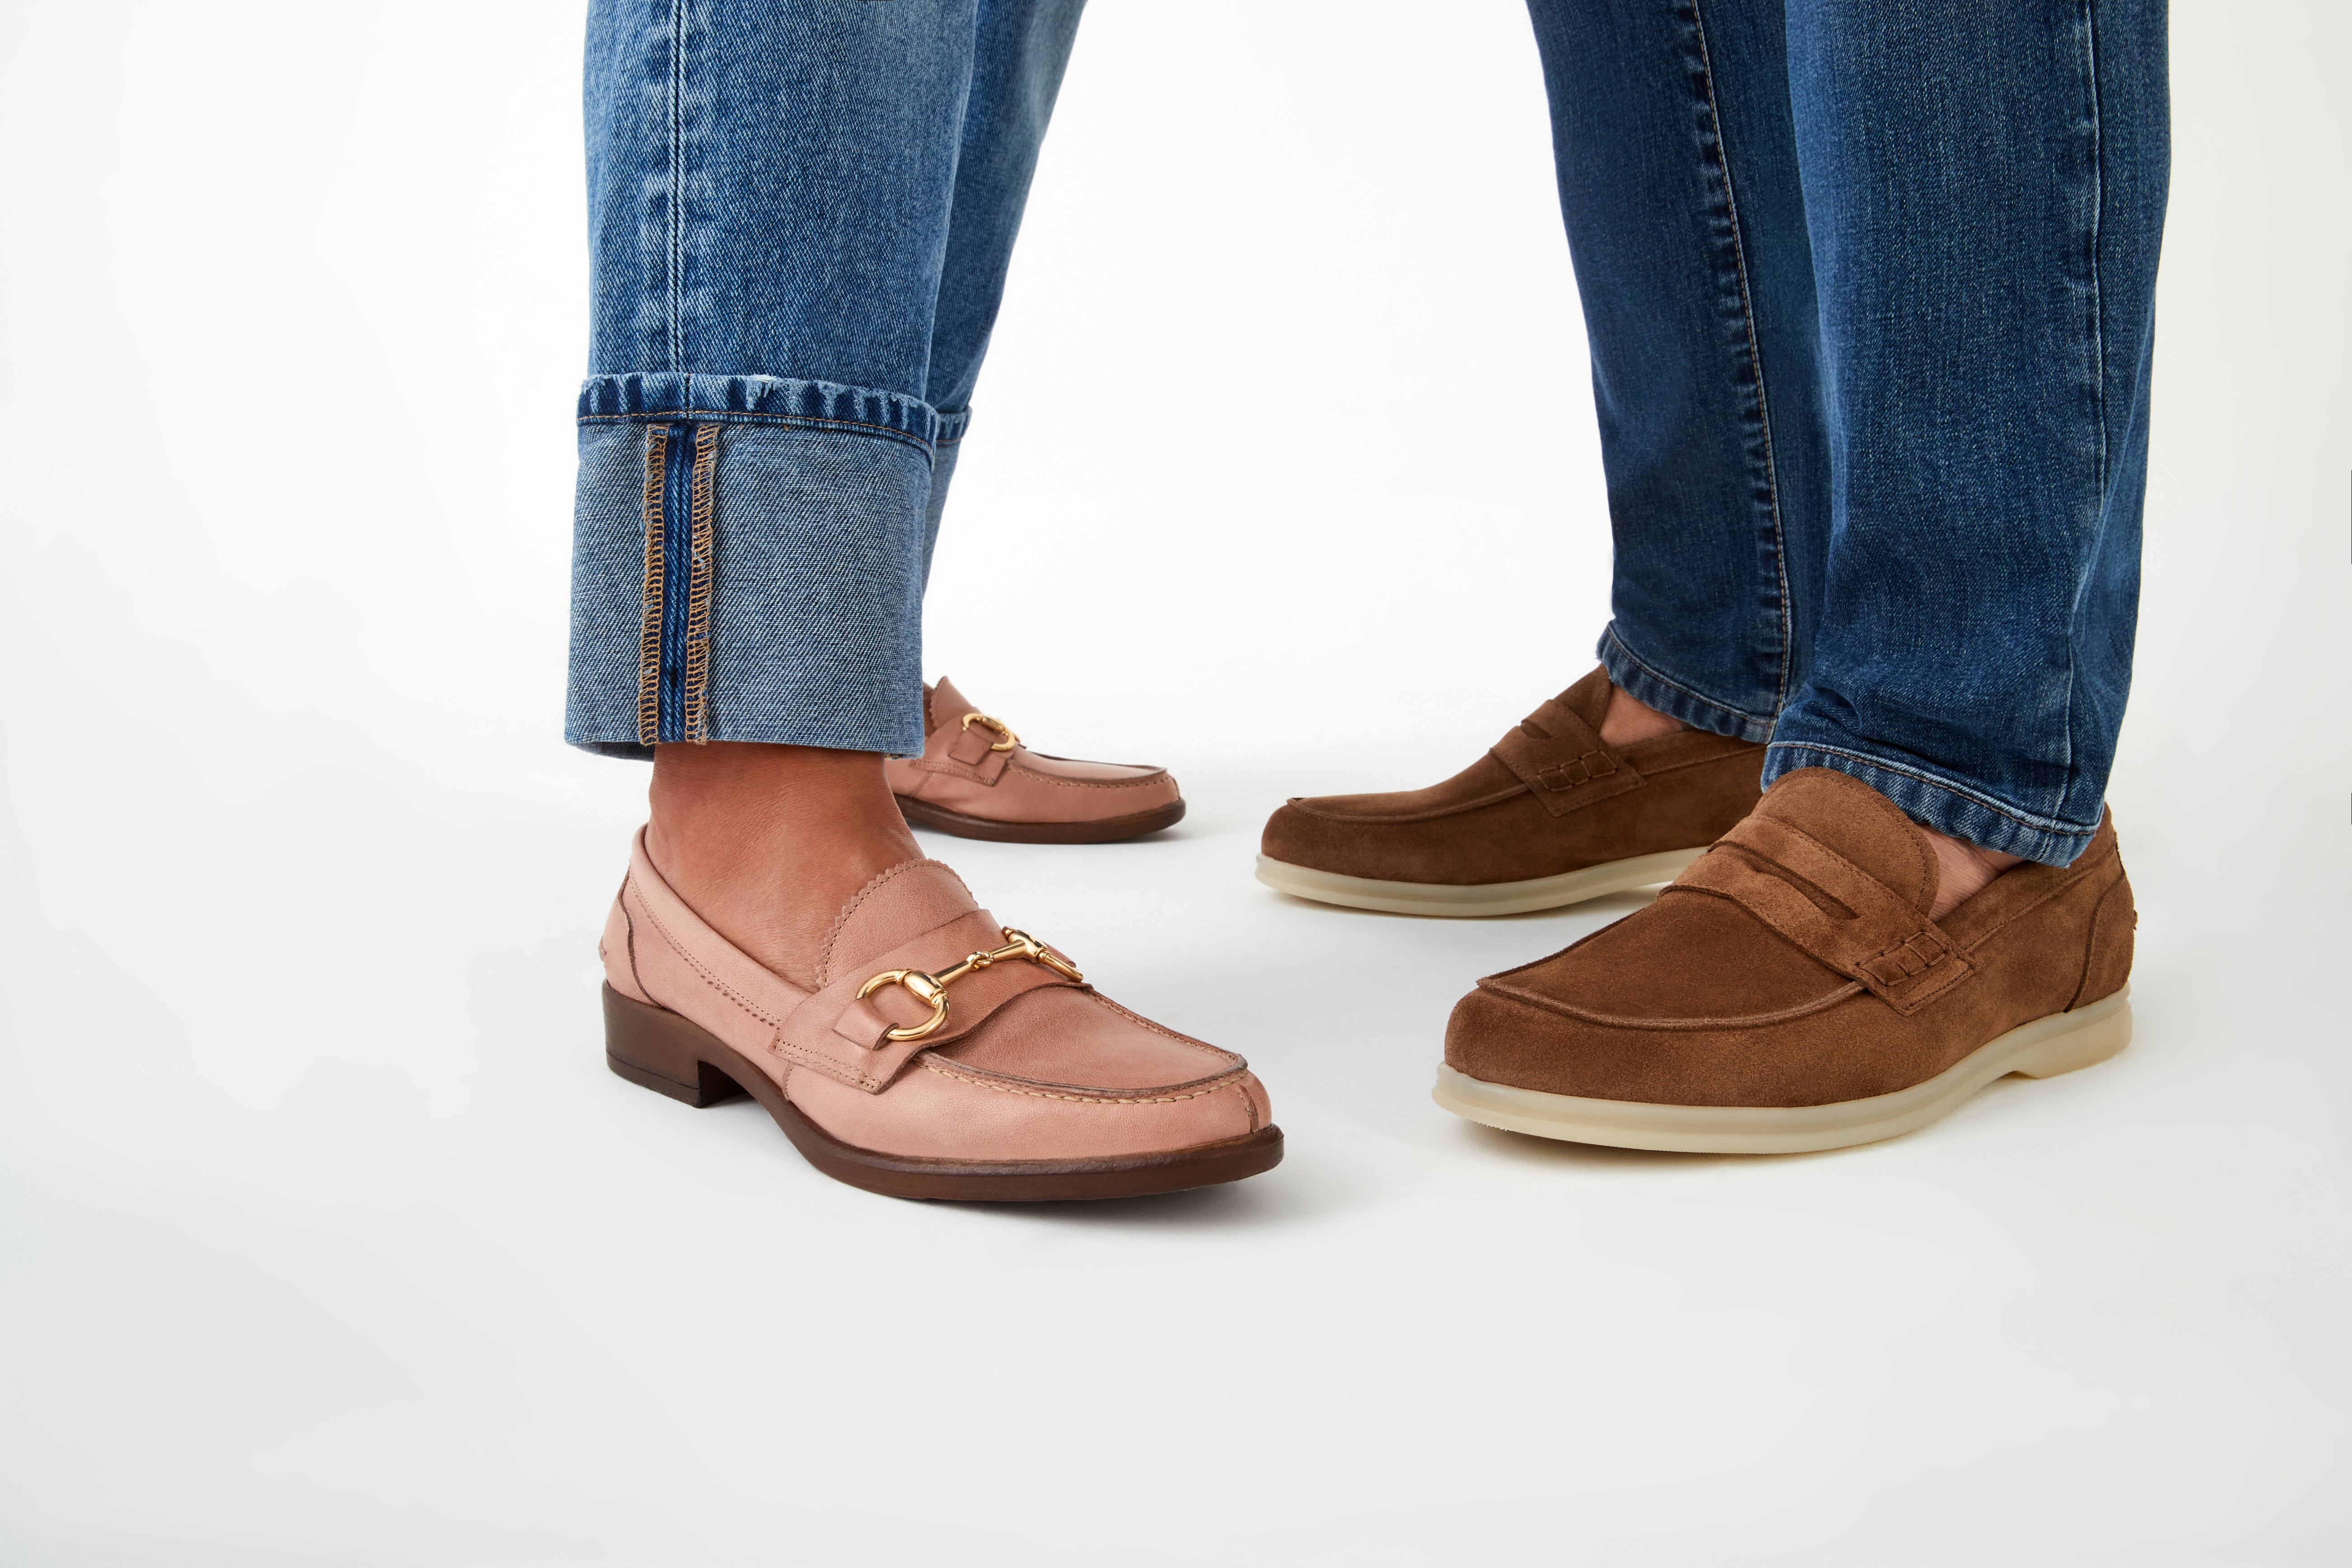 Moccasin tabacco brown